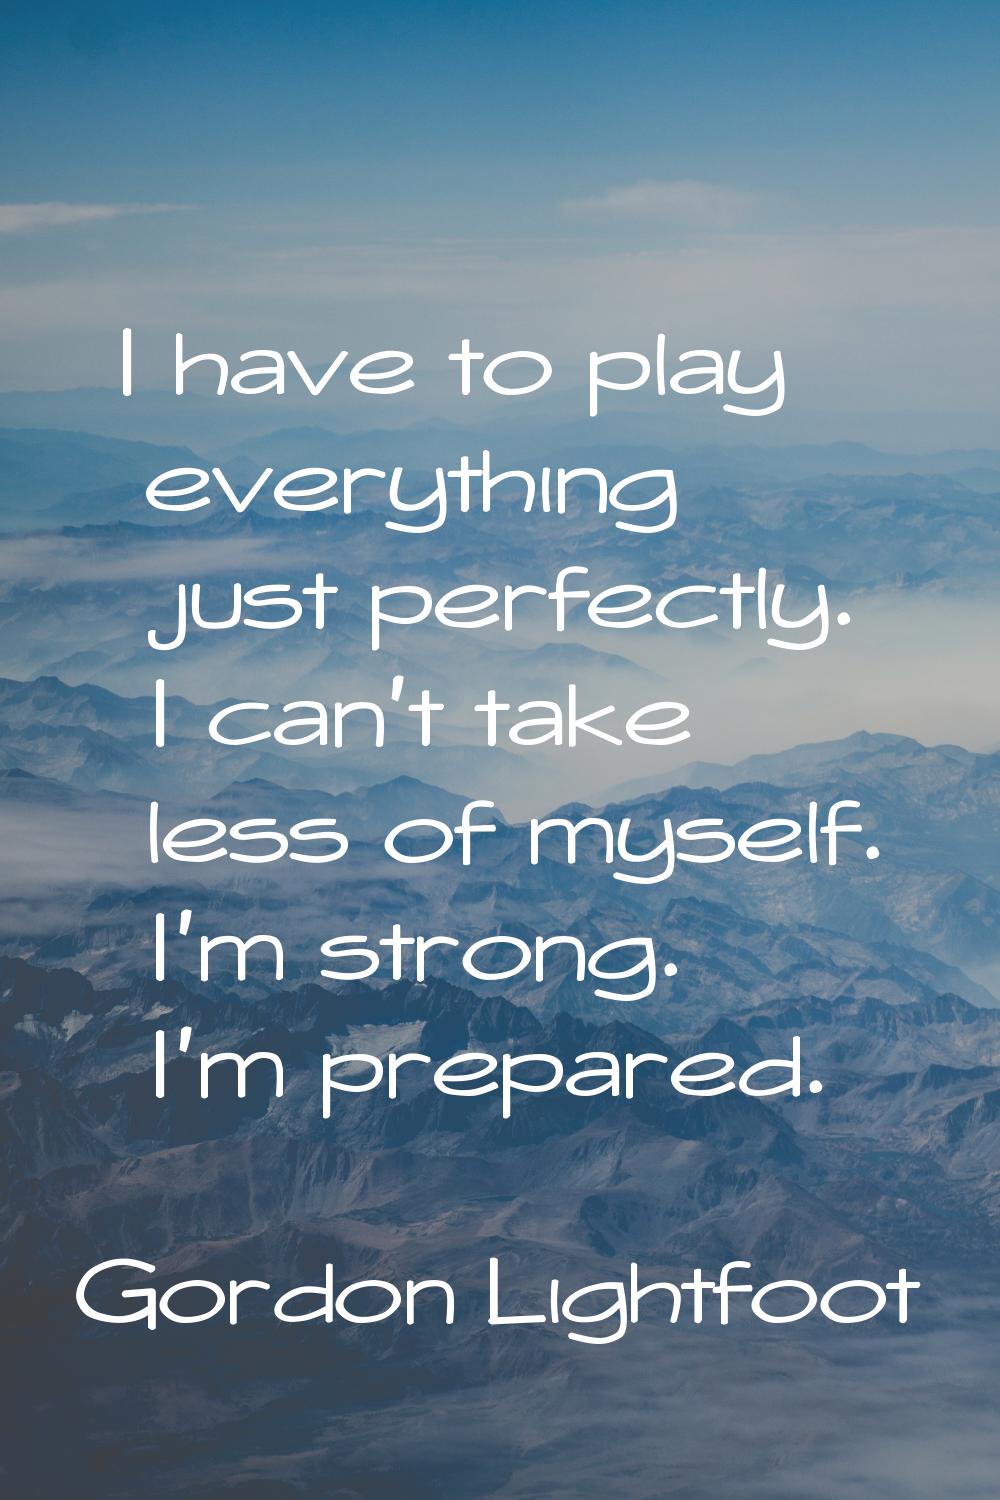 I have to play everything just perfectly. I can't take less of myself. I'm strong. I'm prepared.